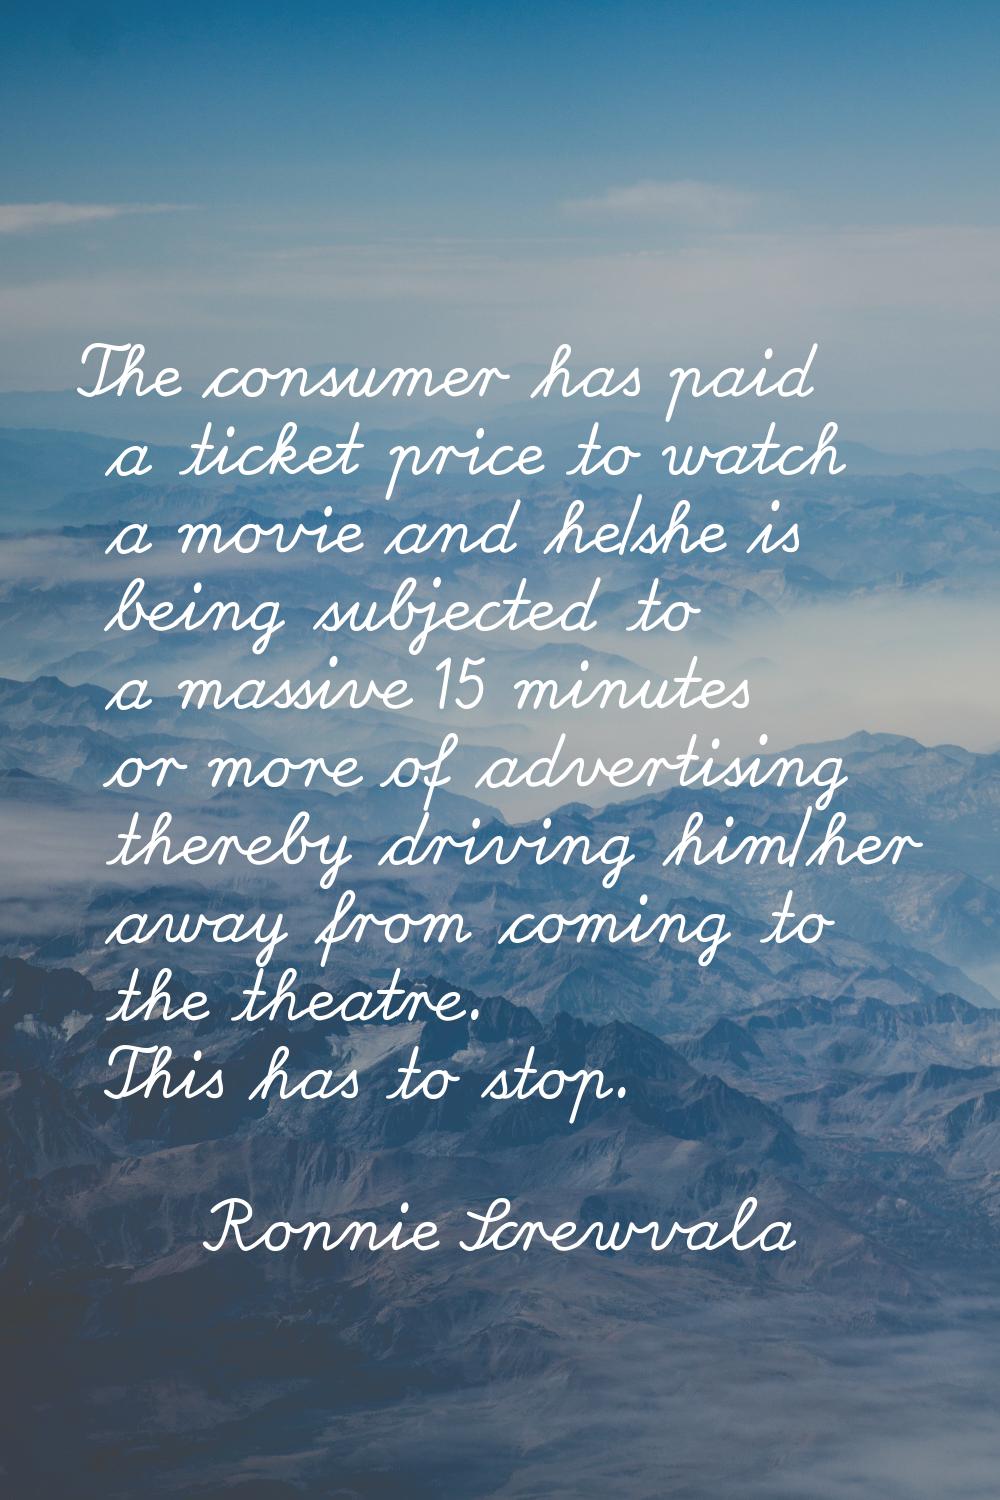 The consumer has paid a ticket price to watch a movie and he/she is being subjected to a massive 15